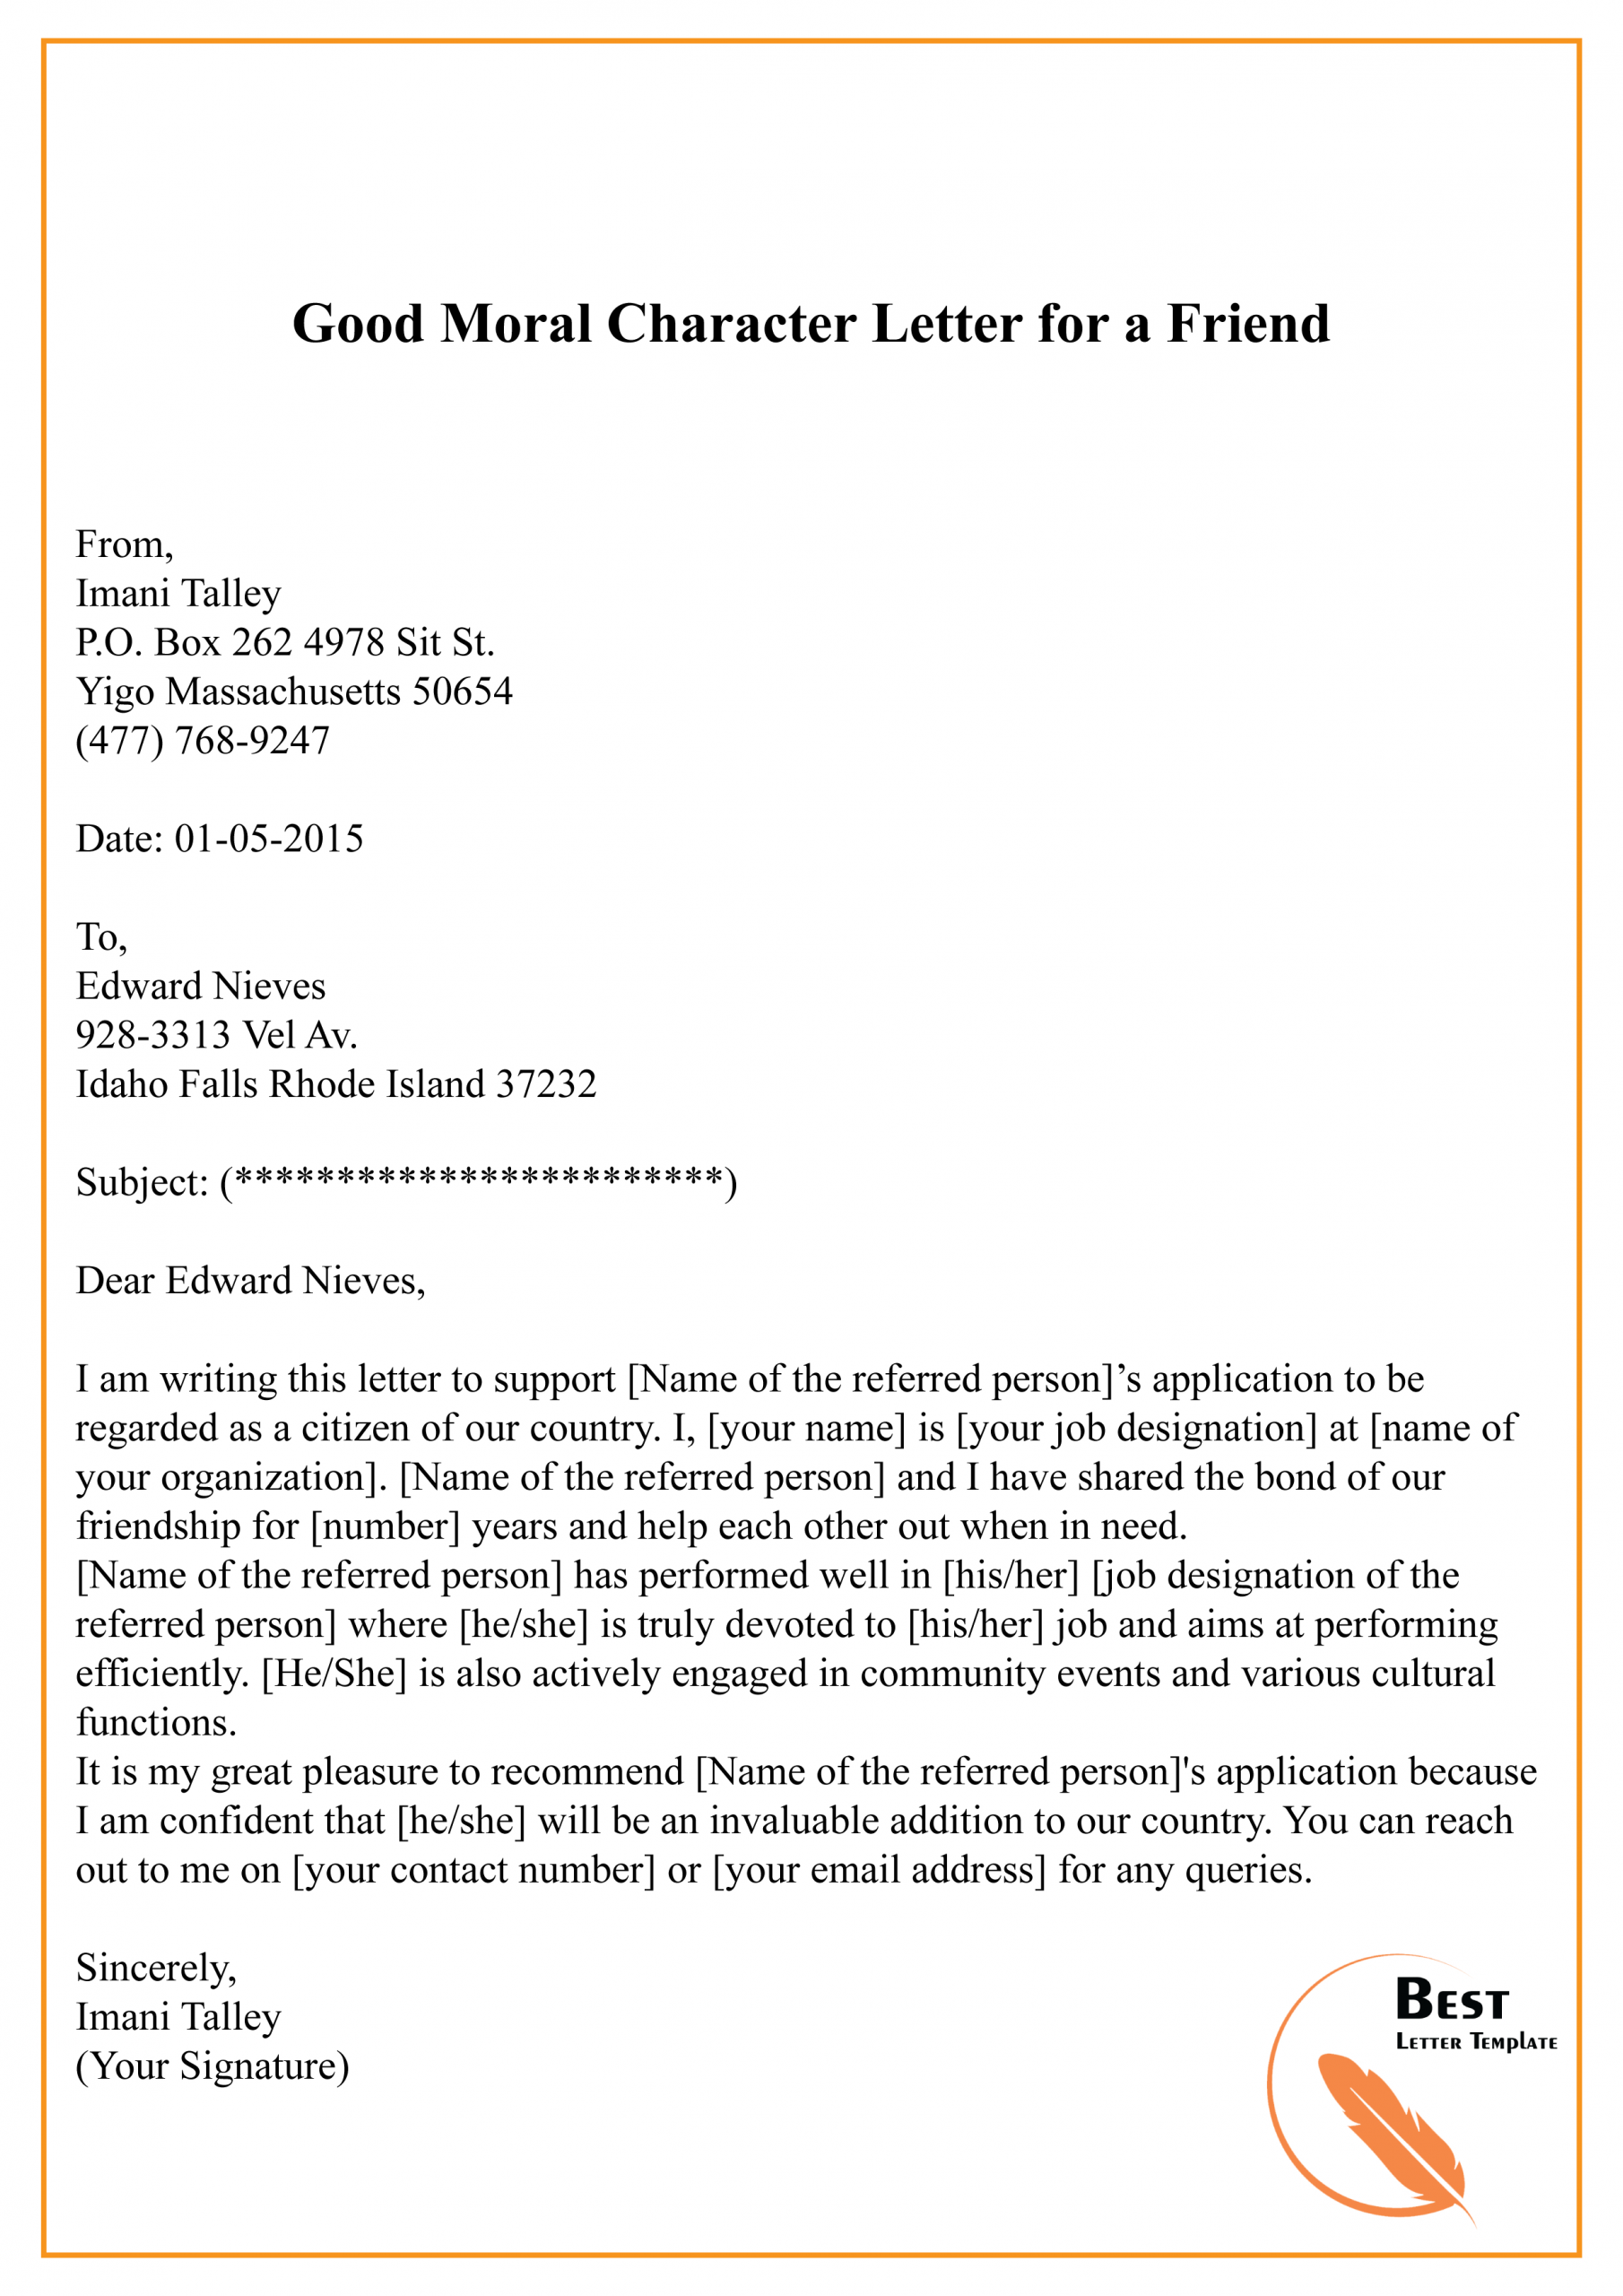 Sample Letter Of Recommendation Good Moral Character • Invitation